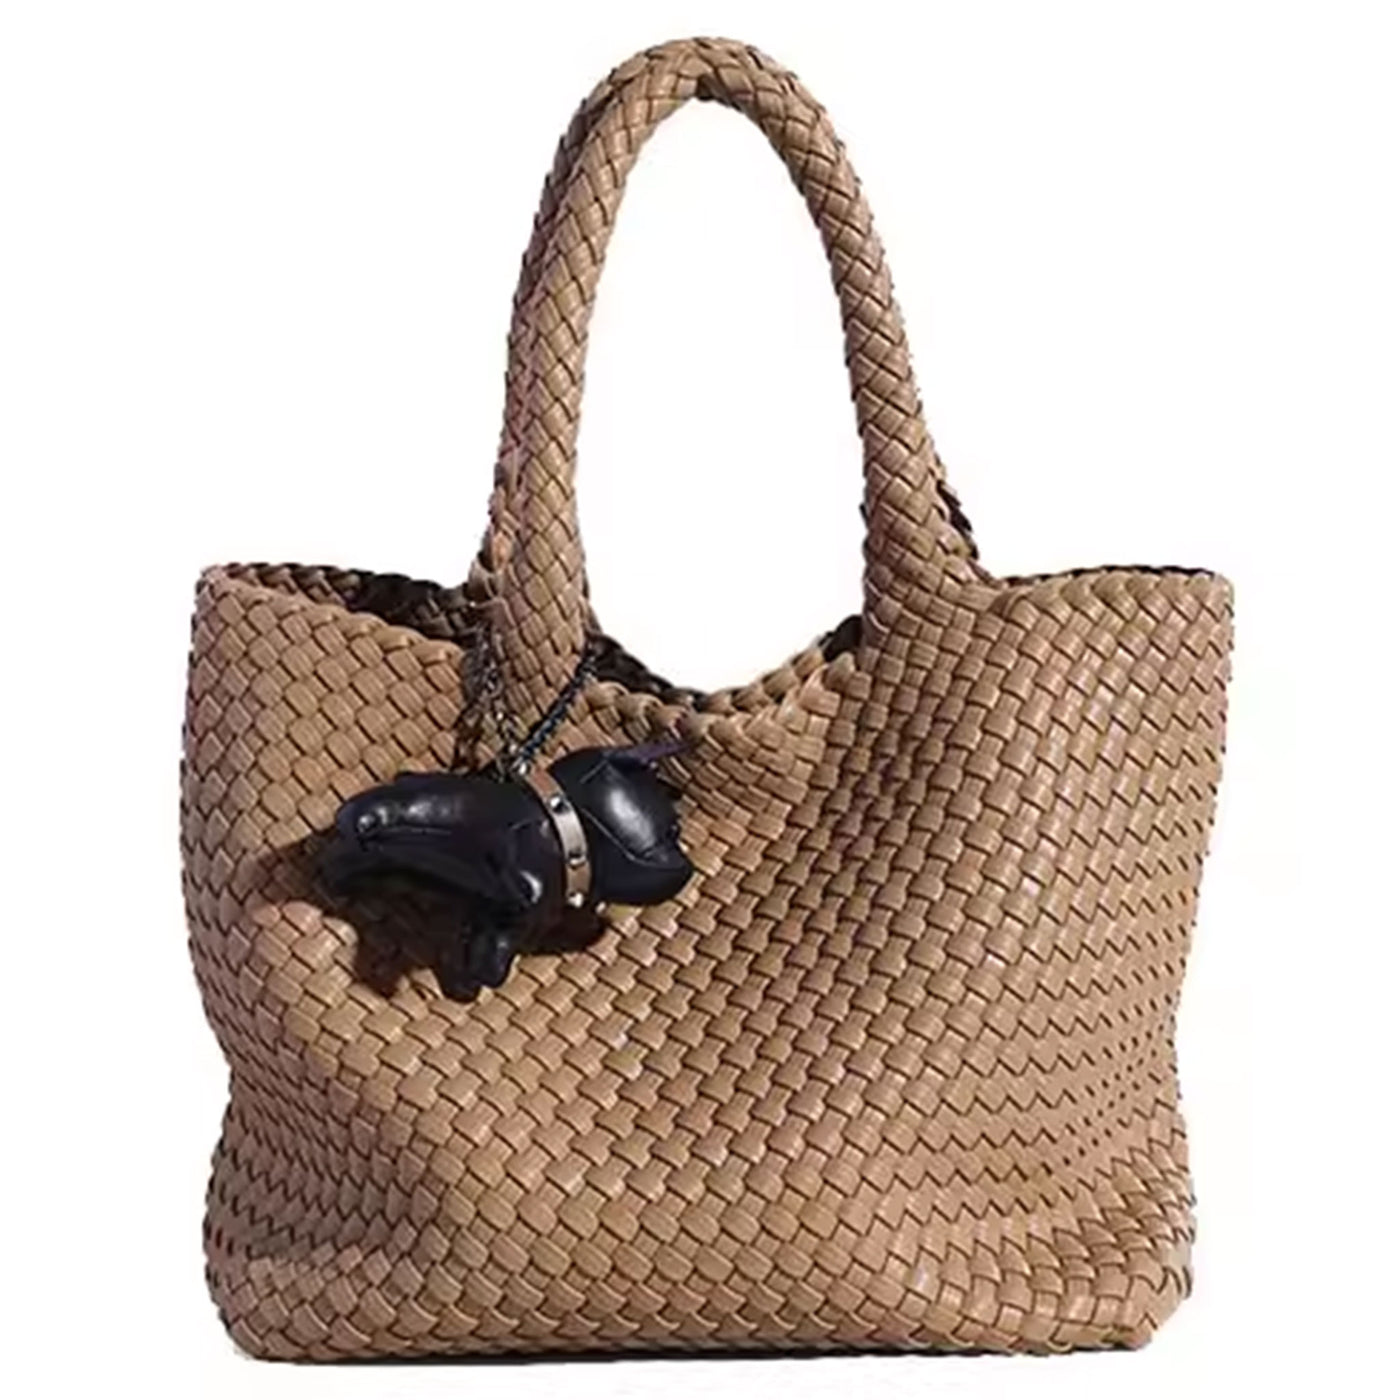 vegan handbag is more than just a pretty accessory; it's a statement of compassion. This is a brown color bag.